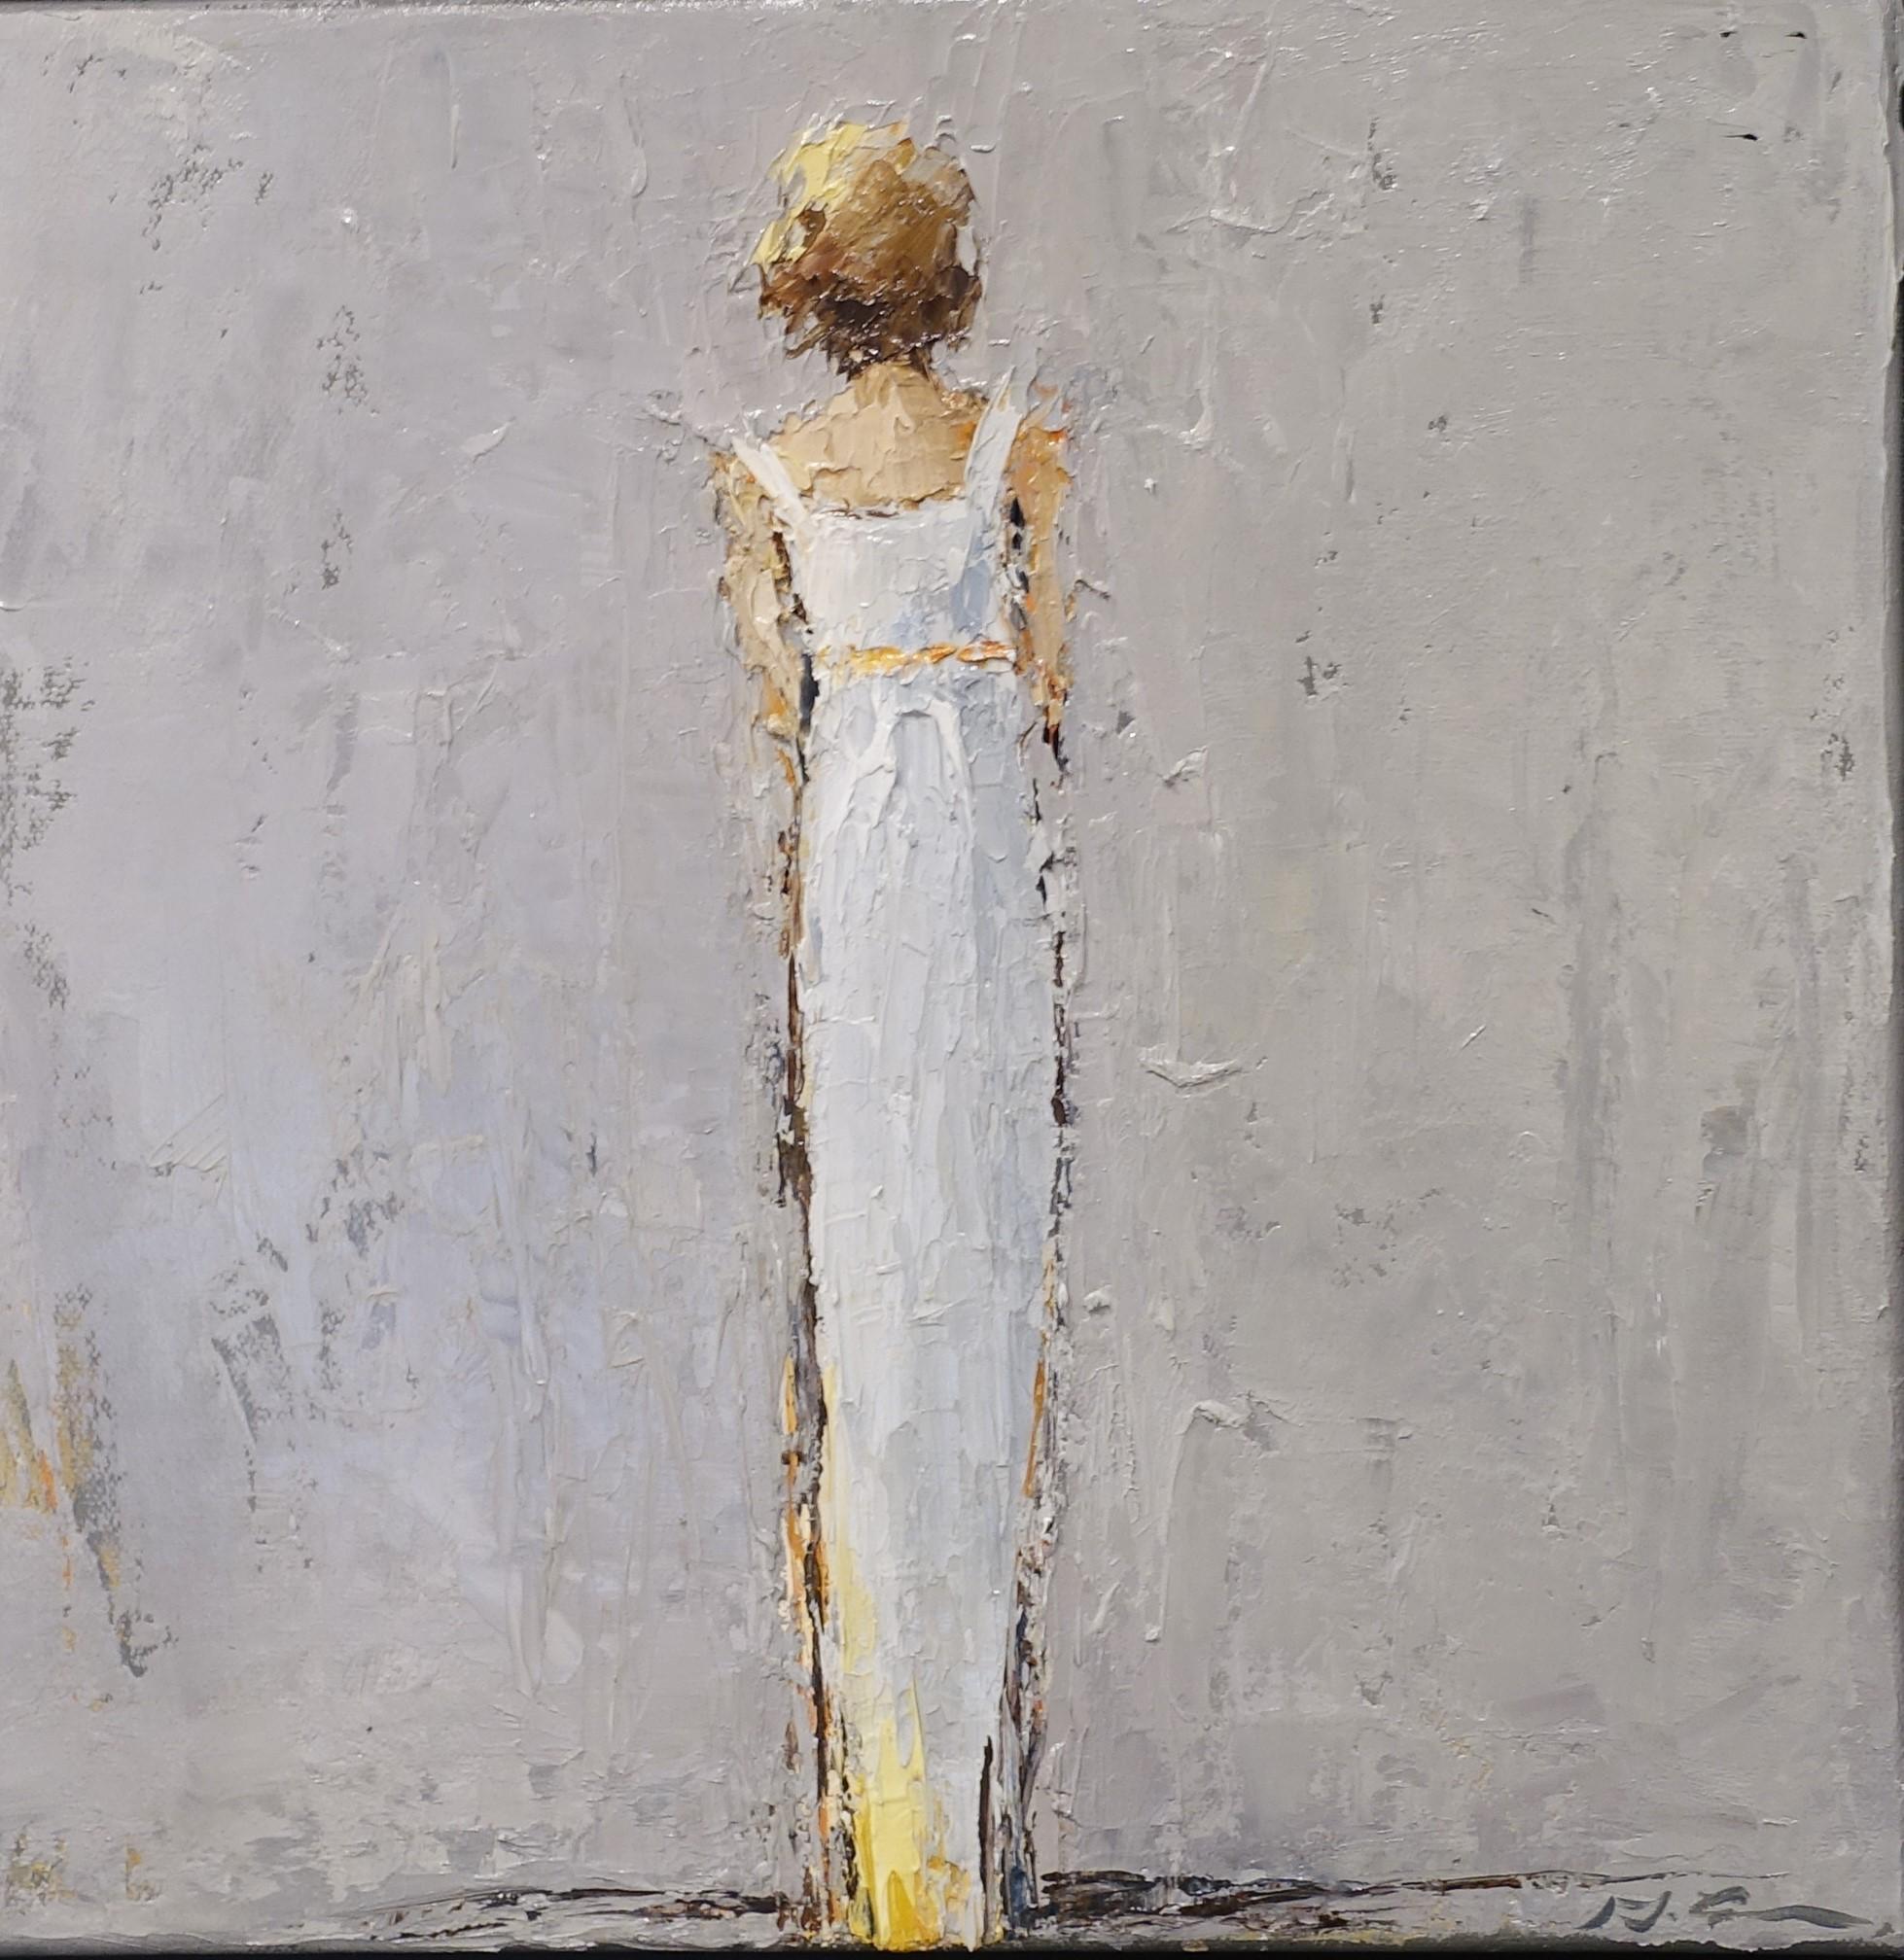 'Eve', is a small framed American Impressionist oil on canvas painting of square format created by Geri Eubanks in 2019. The painting features a blond-hair lady depicted from the back, walking away from us. She is wearing a white dress uncovering